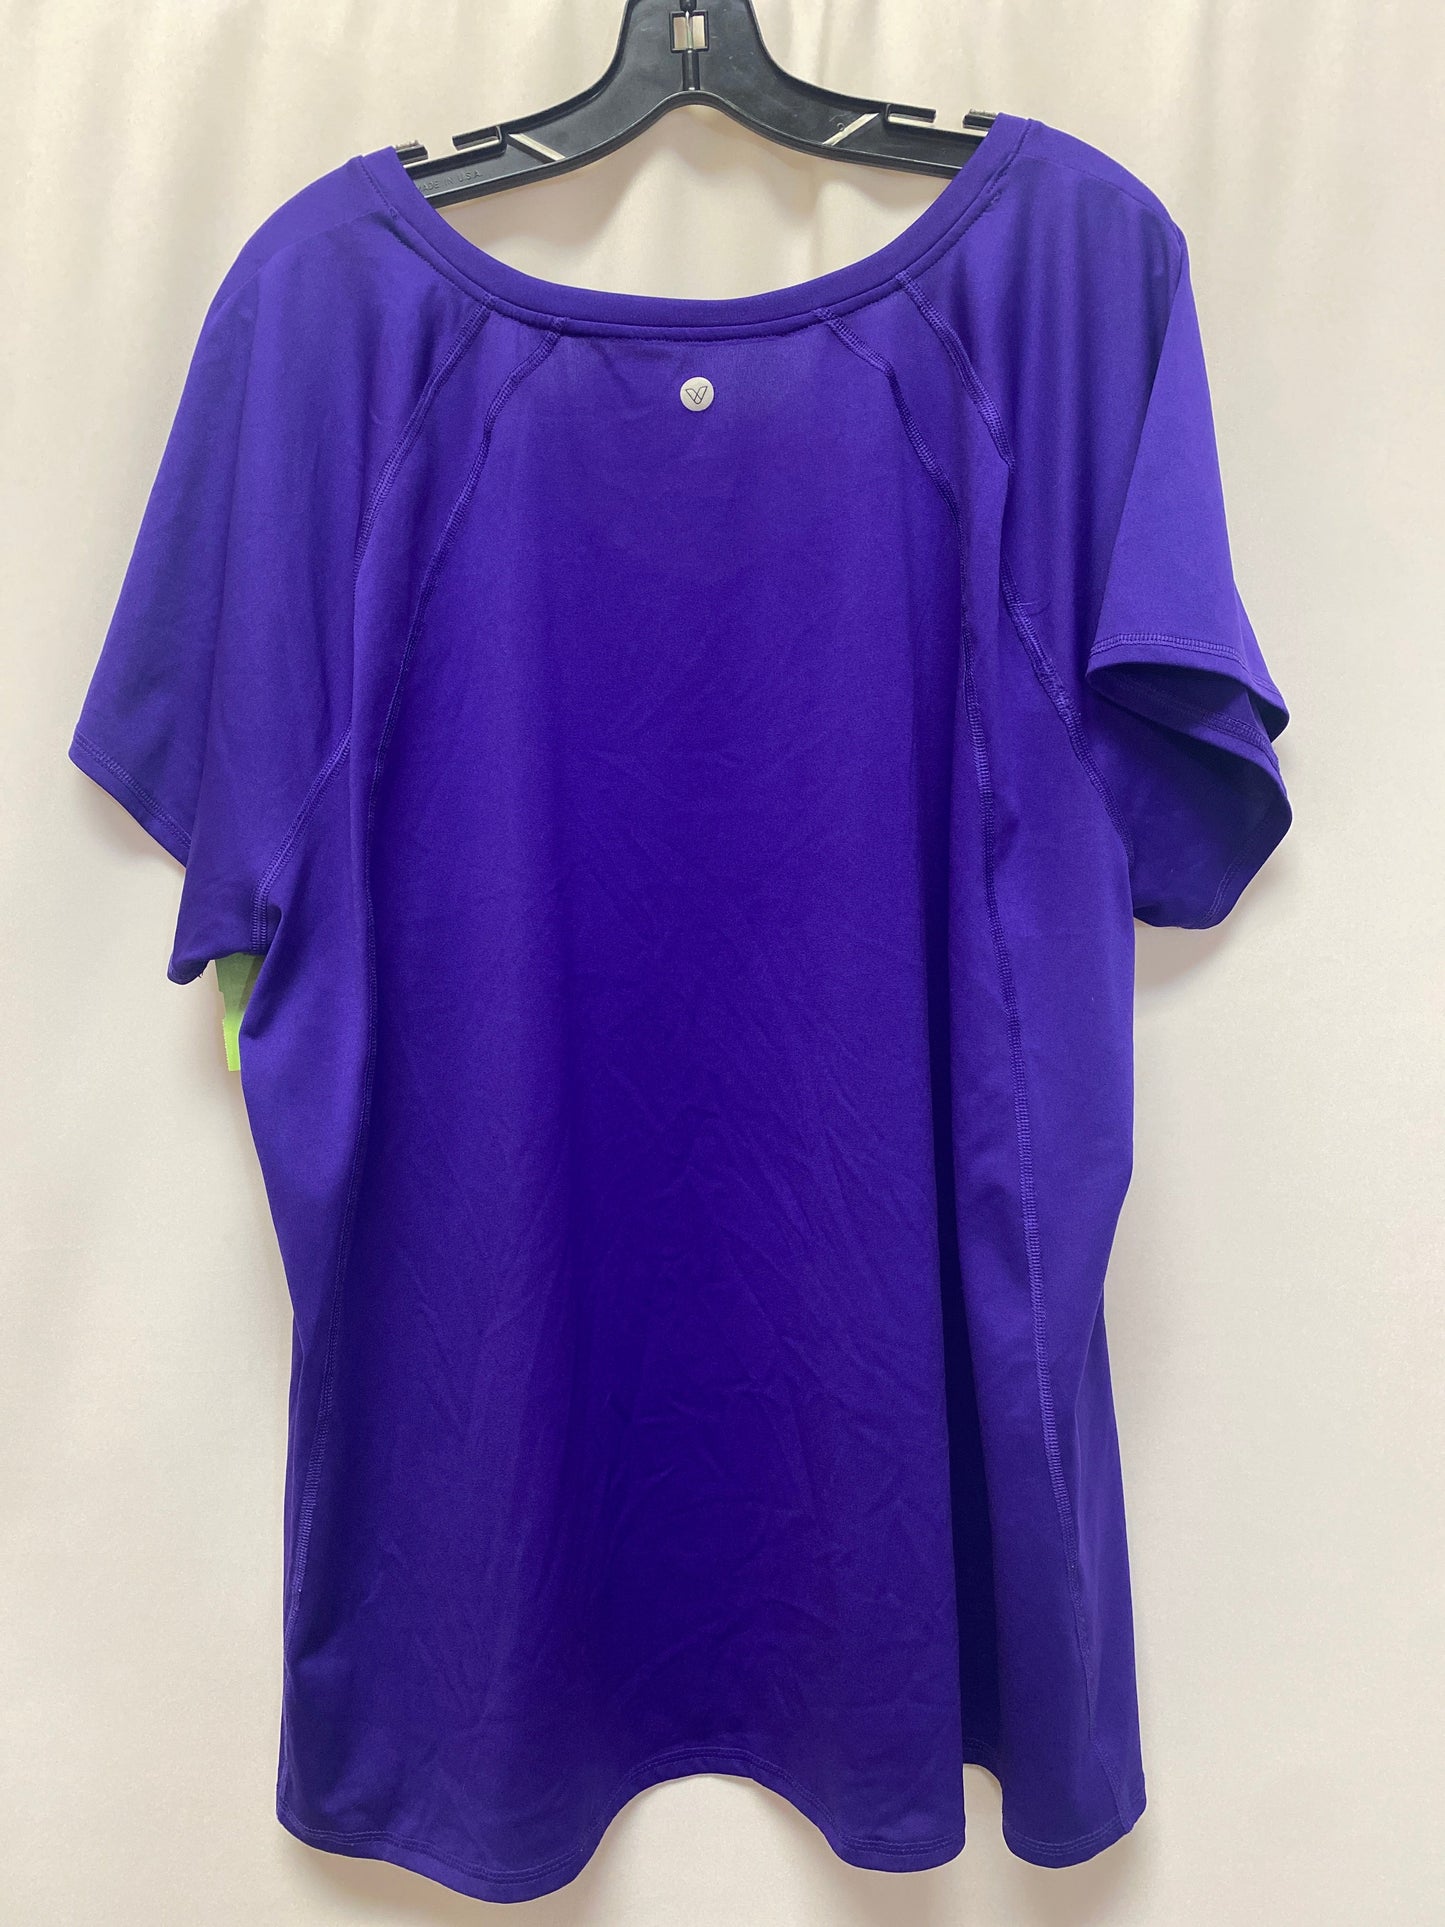 Athletic Top Short Sleeve By Livi Active  Size: 4x